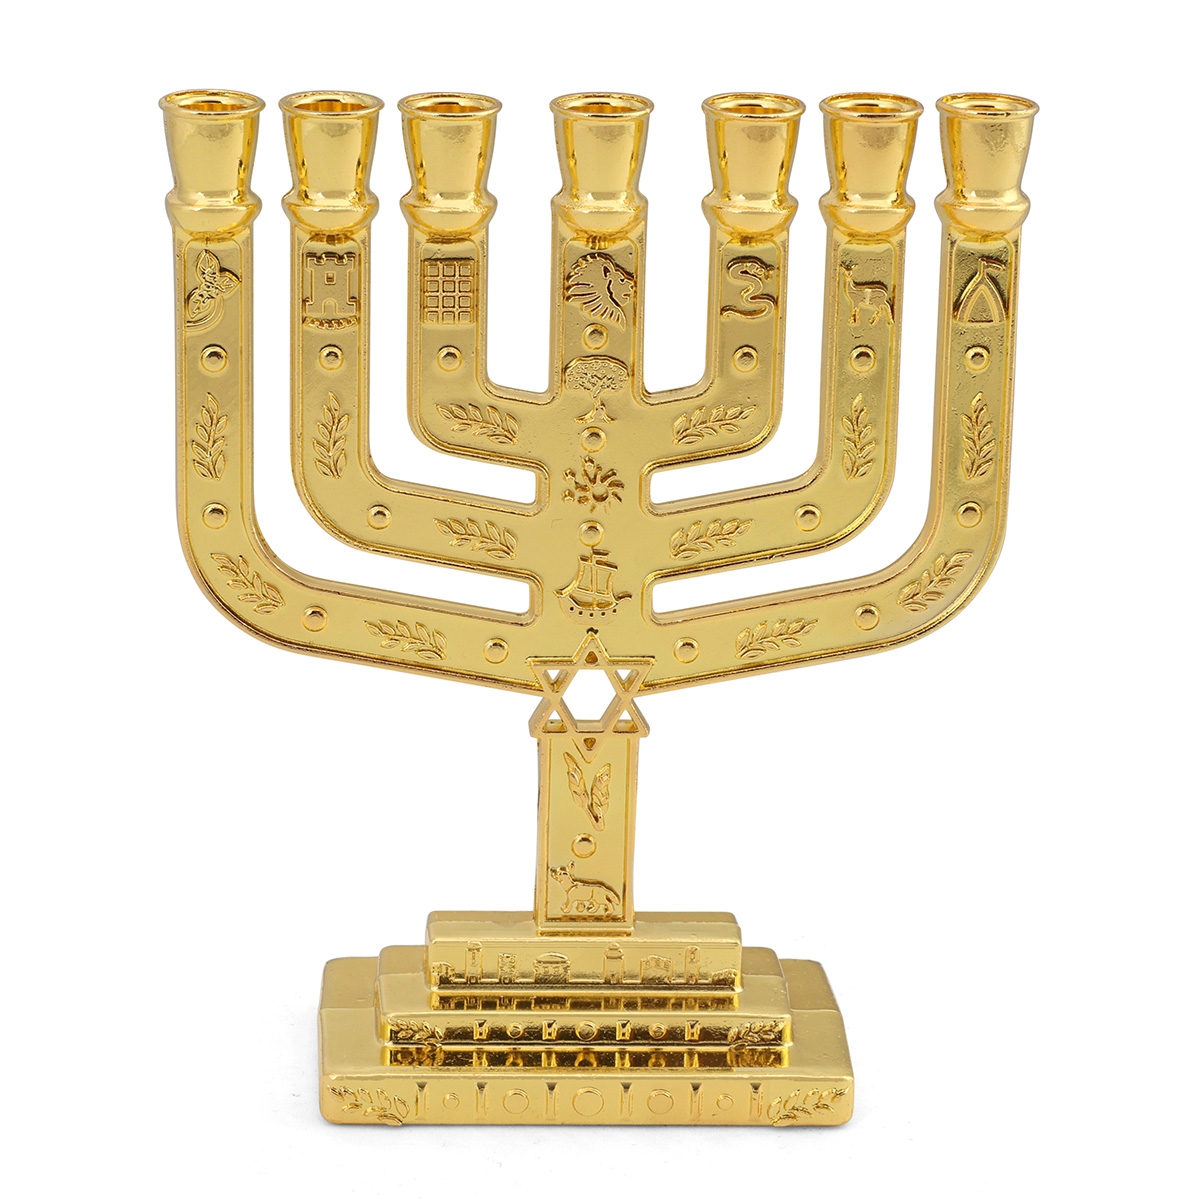 Star of David 7-Branched Metal Menorah with Tribes of Israel - 1